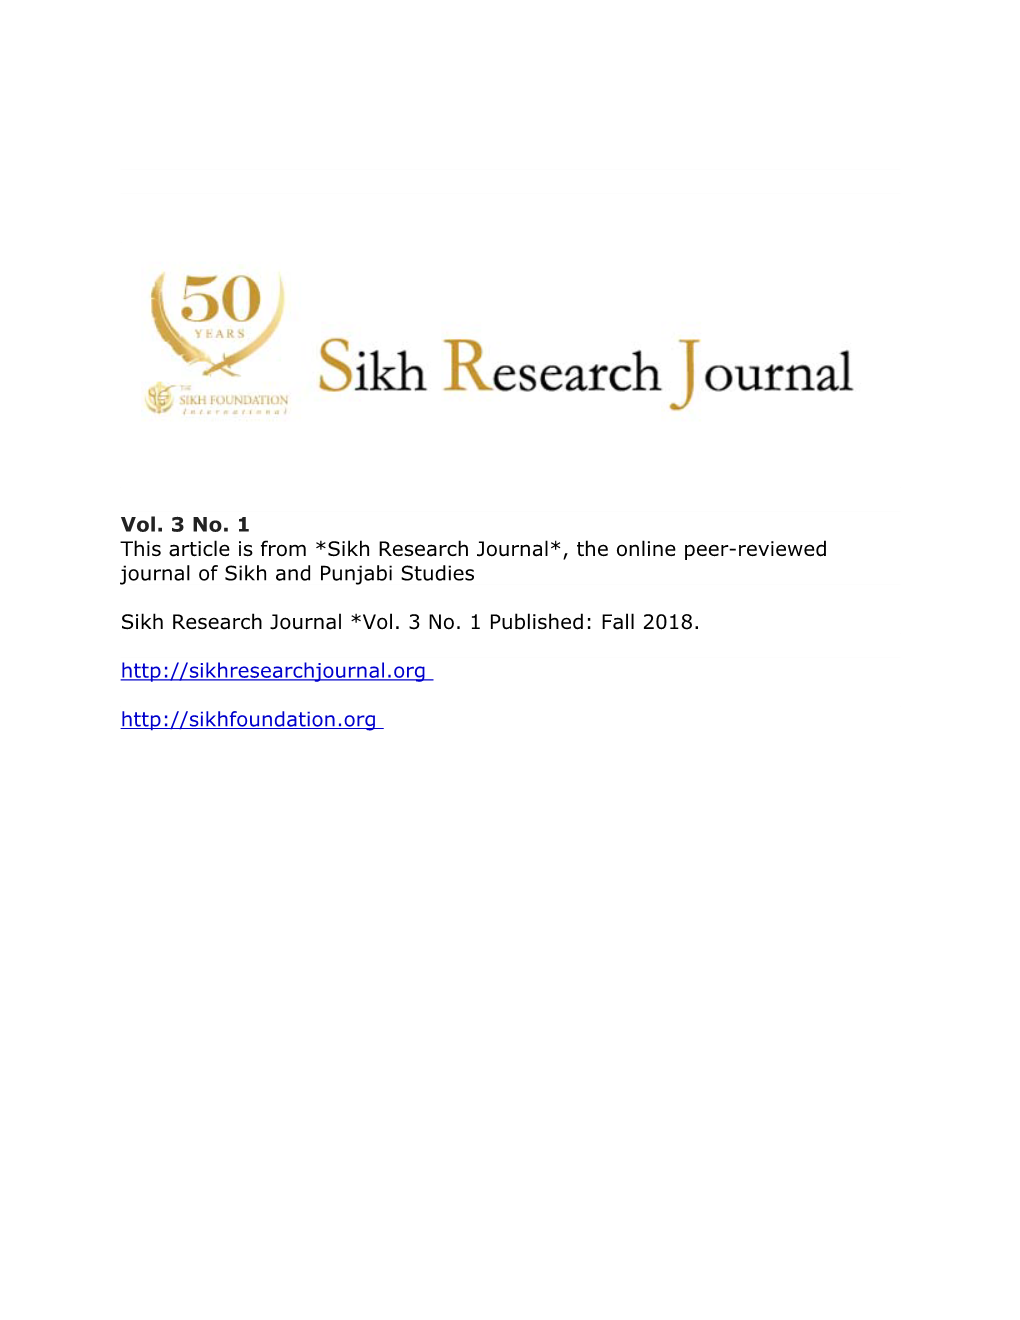 Vol. 3 No. 1 This Article Is from *Sikh Research Journal*, the Online Peer-Reviewed Journal of Sikh and Punjabi Studies Sikh